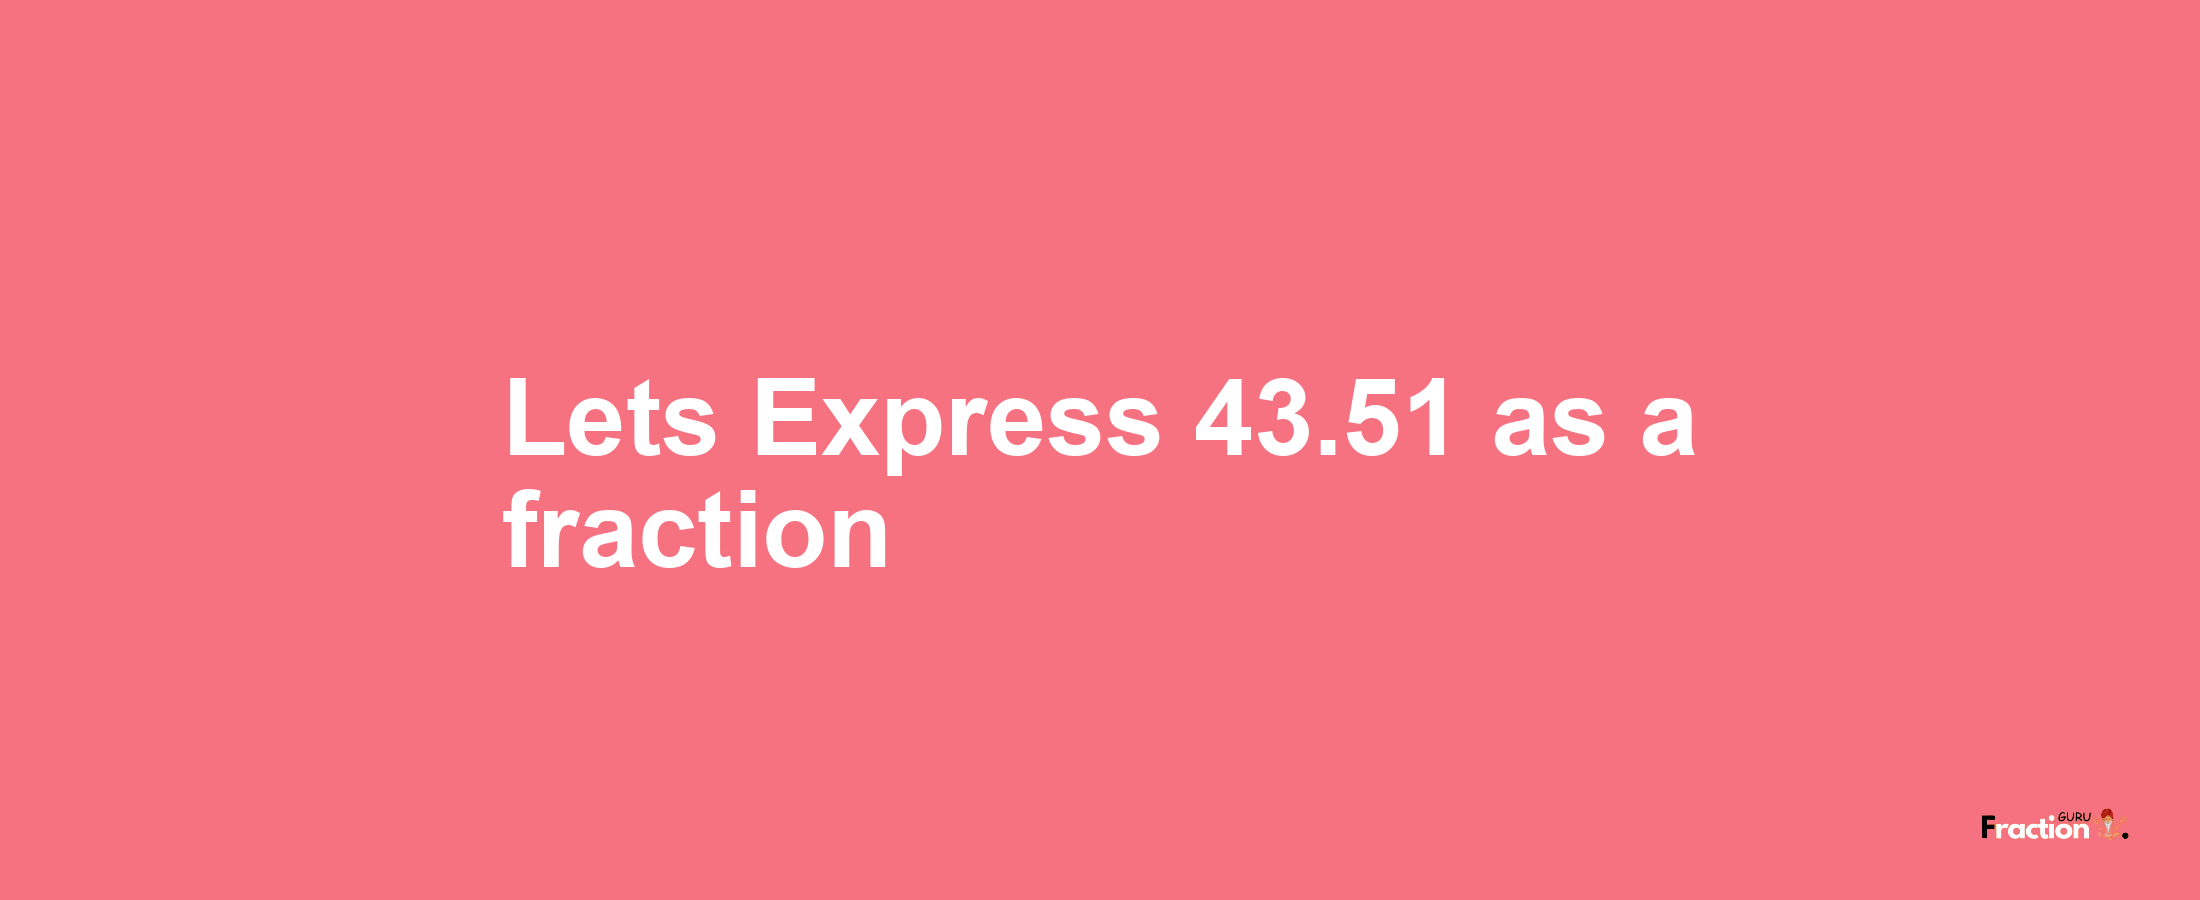 Lets Express 43.51 as afraction